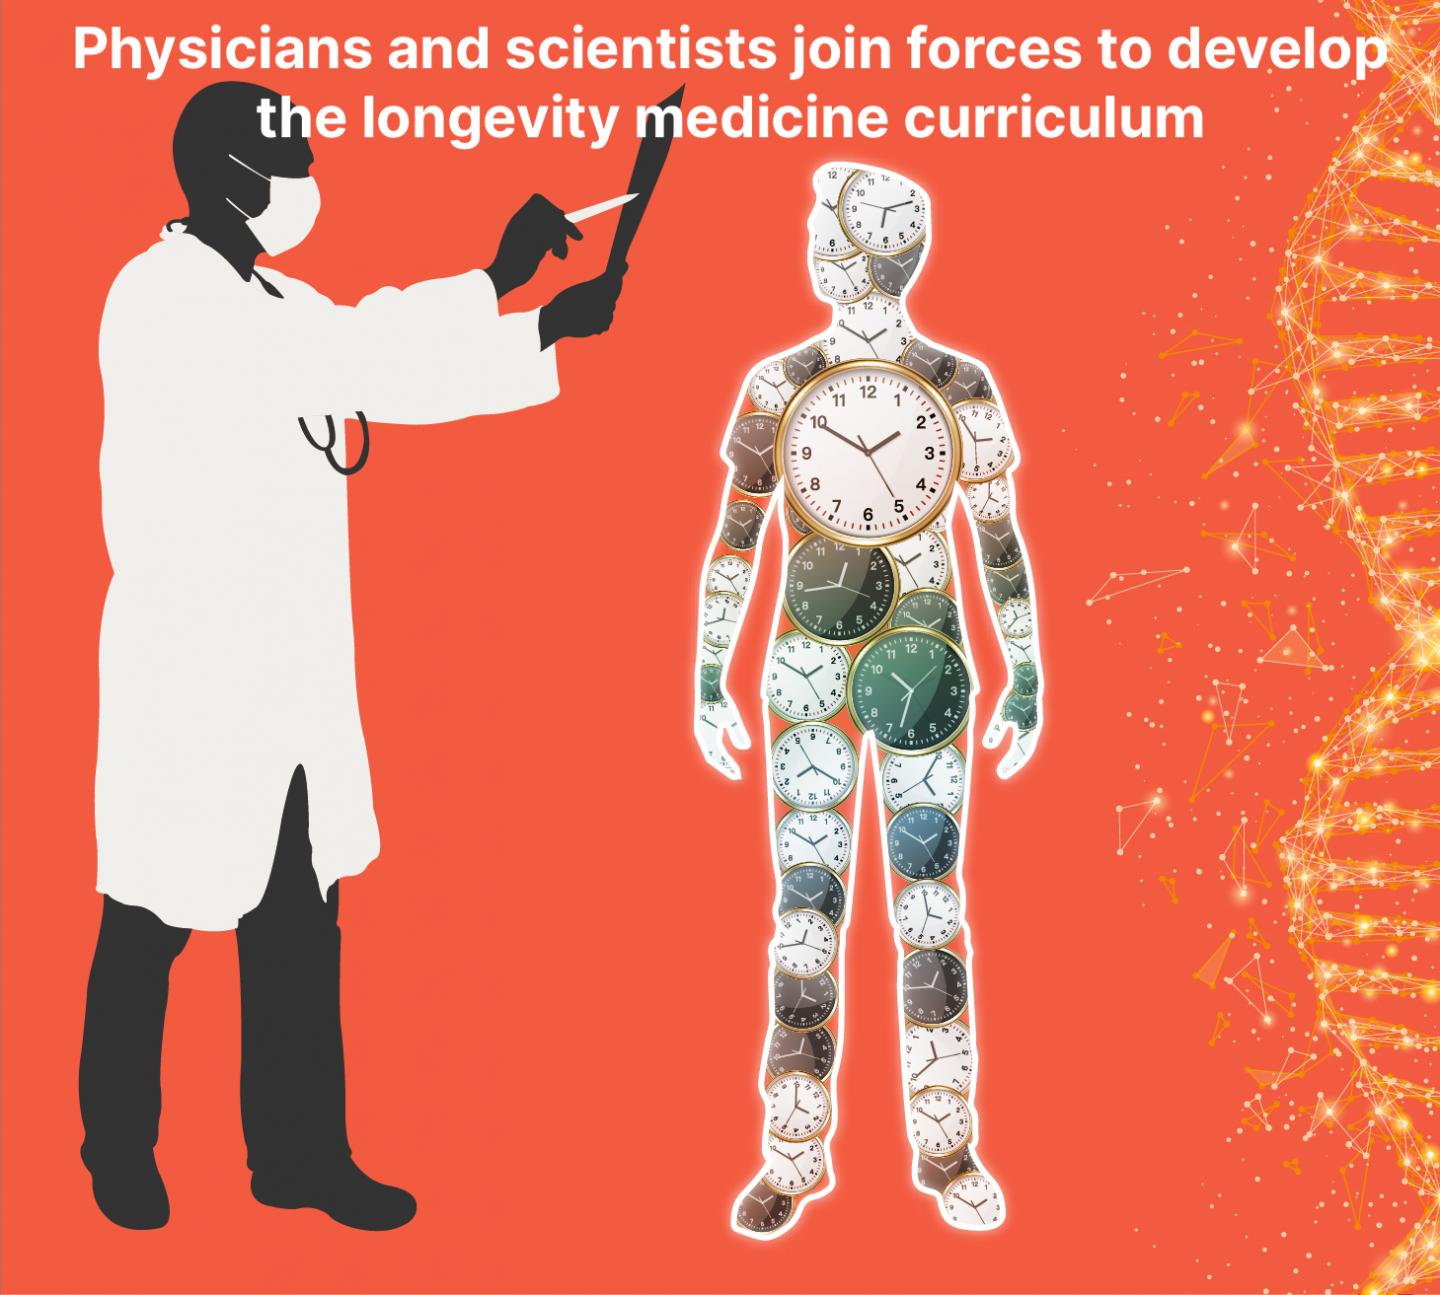 Physicians and scientists join forces to develop the longevity medicine curriculum